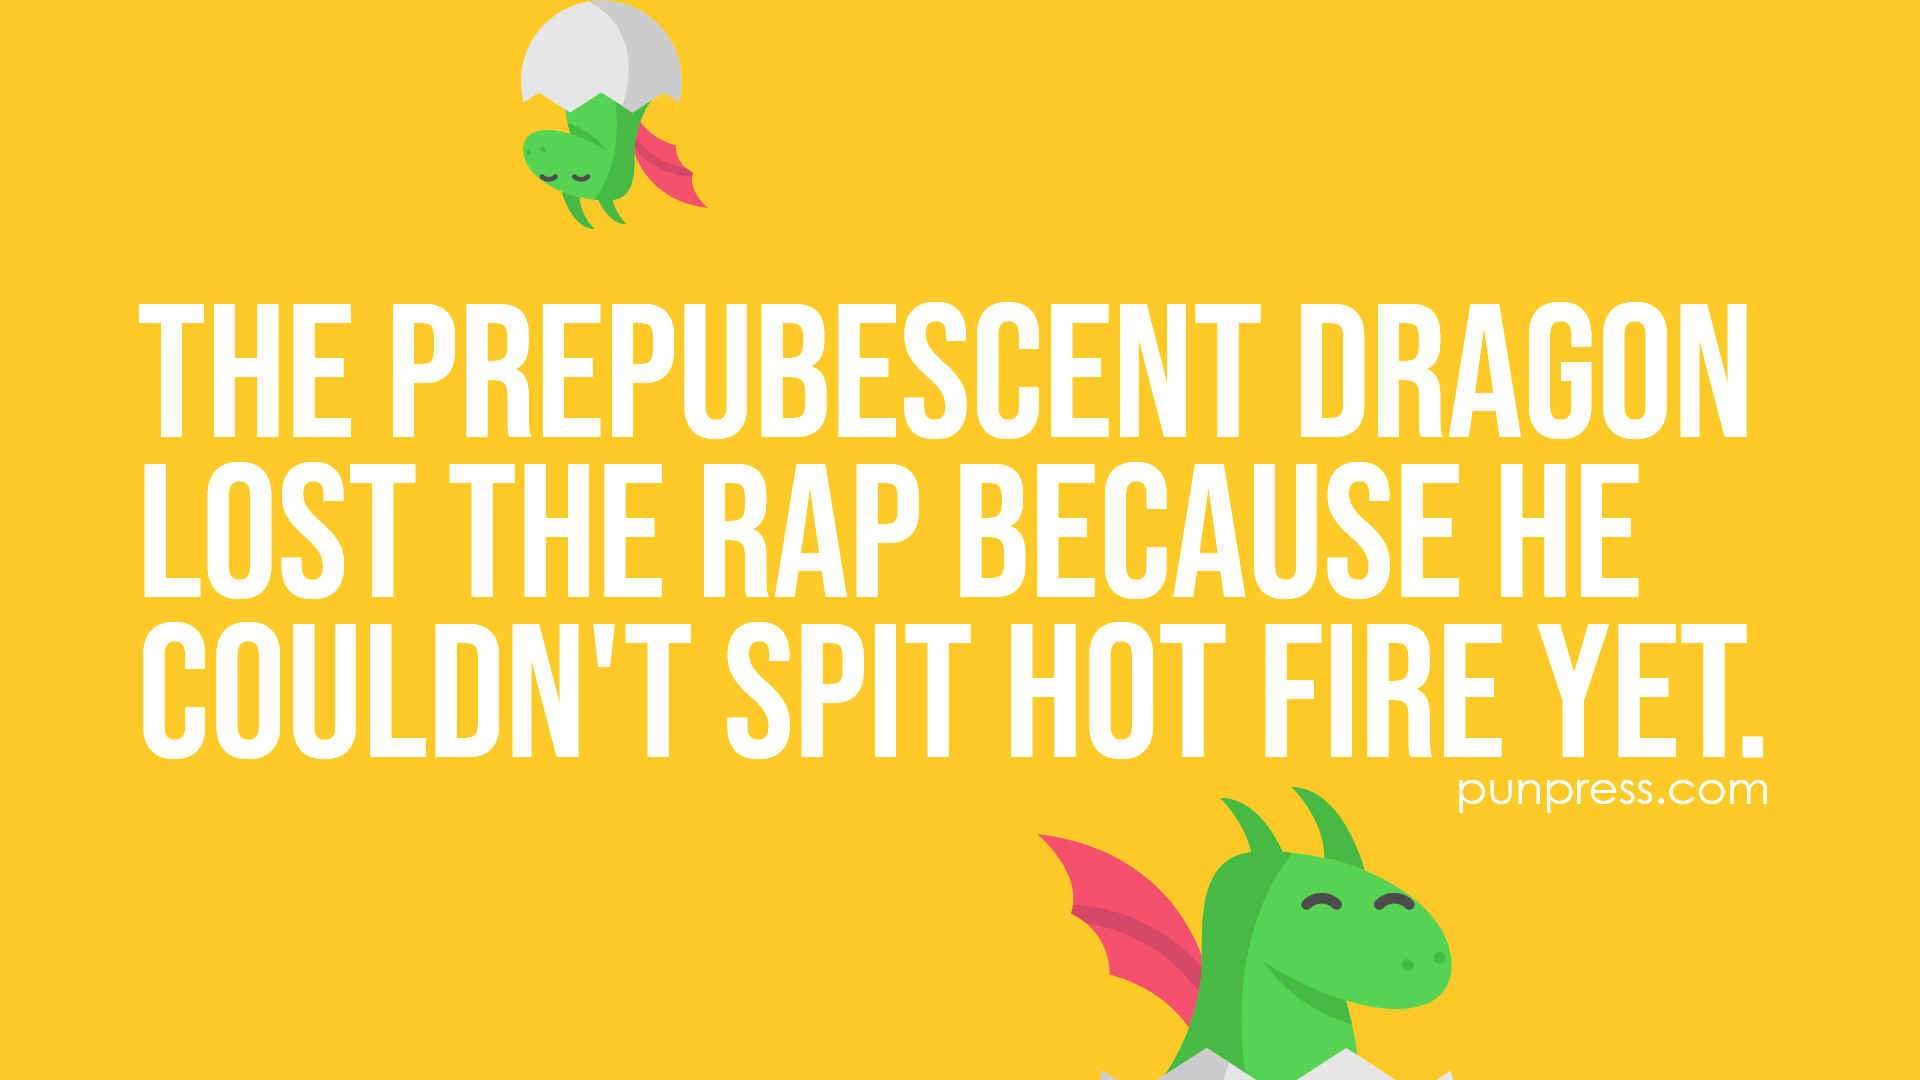 the-prepubescent-dragon-lost-the-rap-because-he-couldnt-spit-hot-fire-yet-dragon-puns